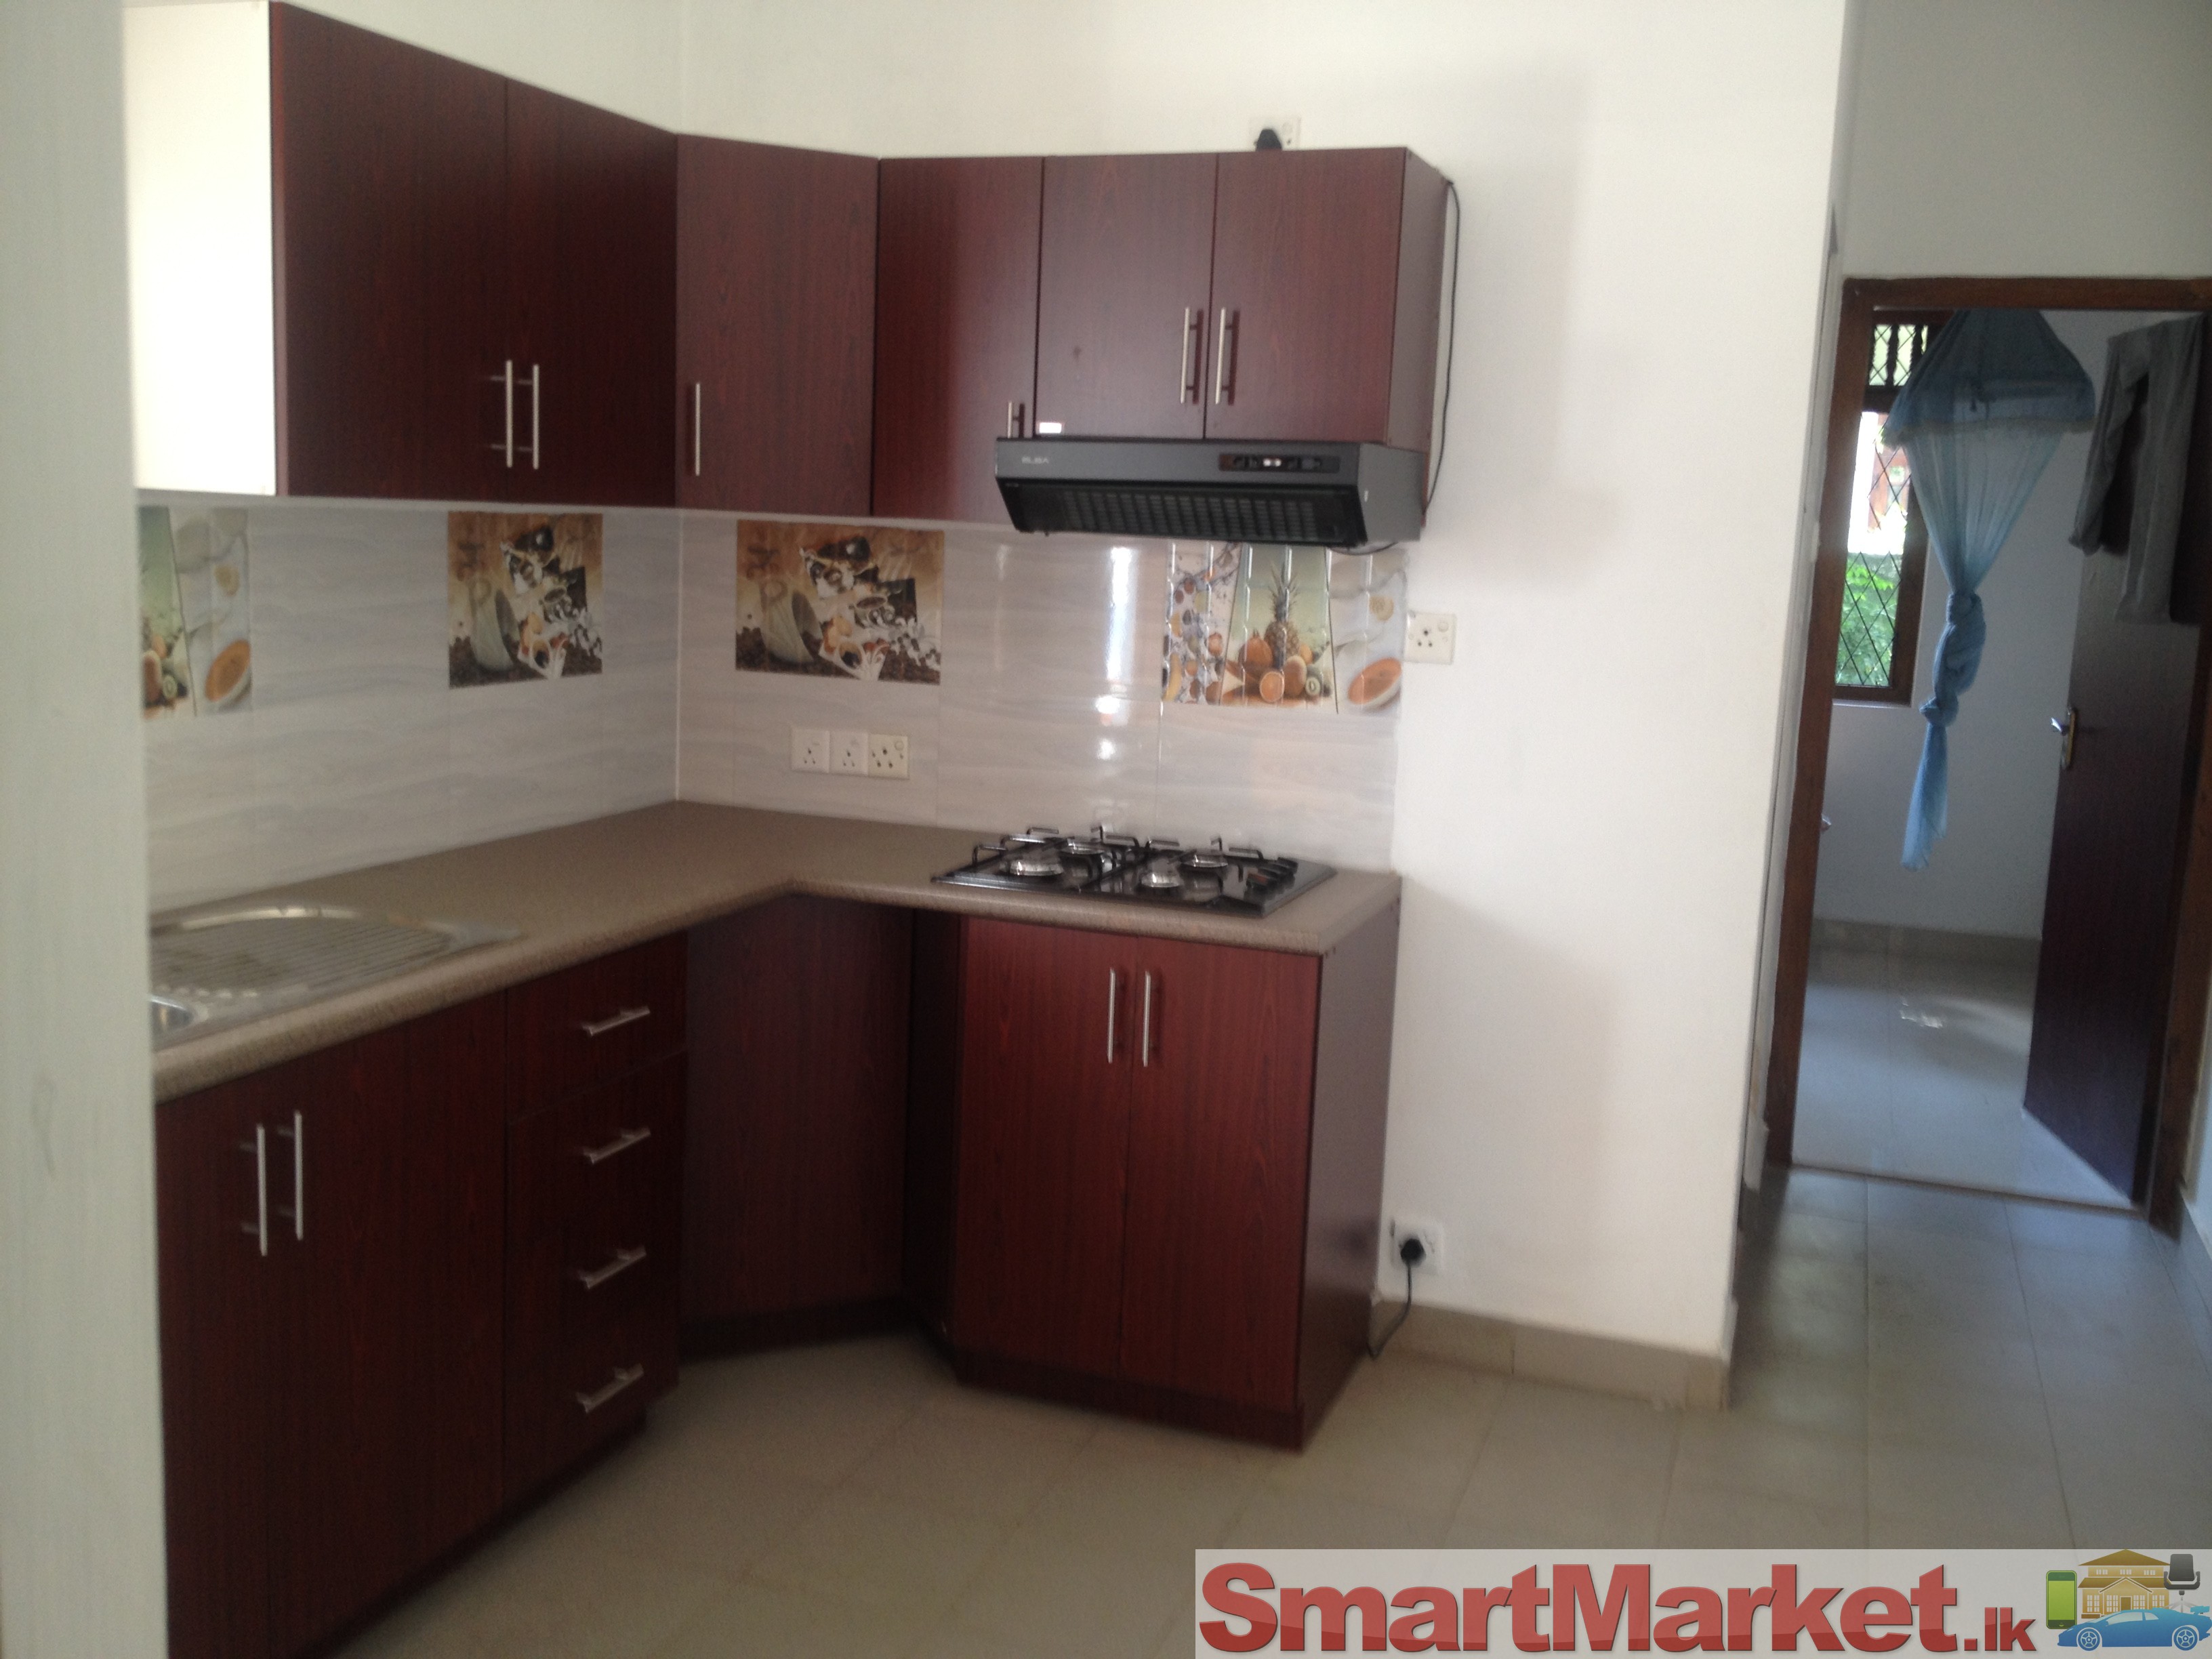 6 BR House near Dalugama Campus & Colombo Kandy Road / share with 2 joined families OR with your own